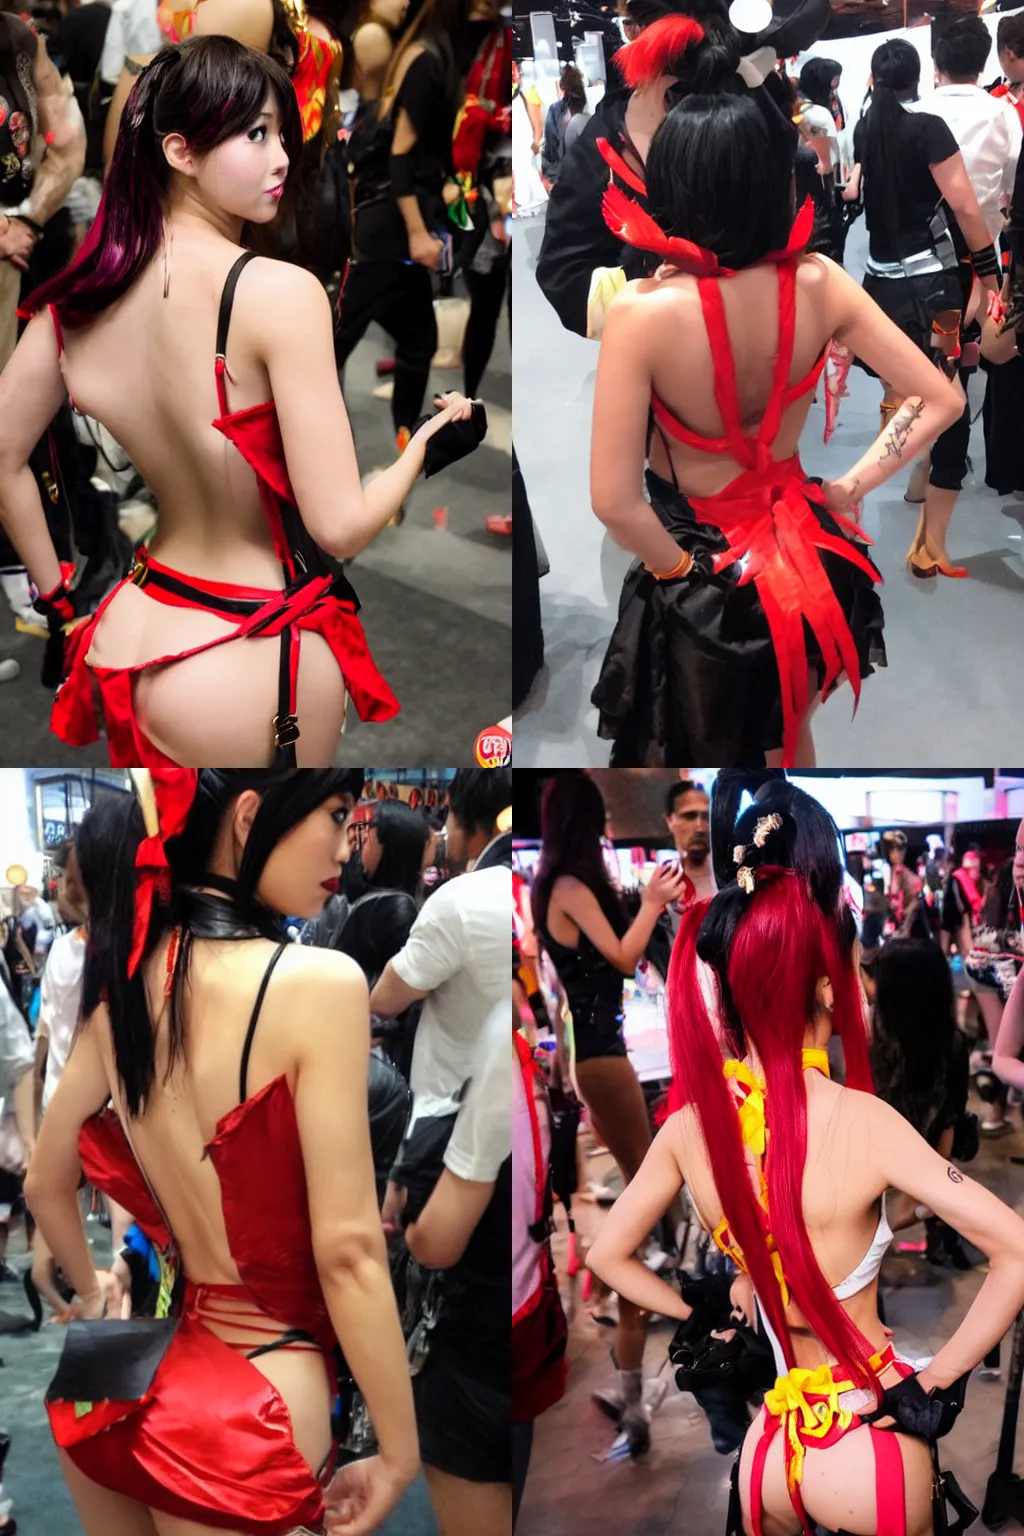 Prompt: back of a beautiful cosplayer dressed as mai shiranui, photo taken at e 3 conference, facing away from camera, posing, party atmosphere